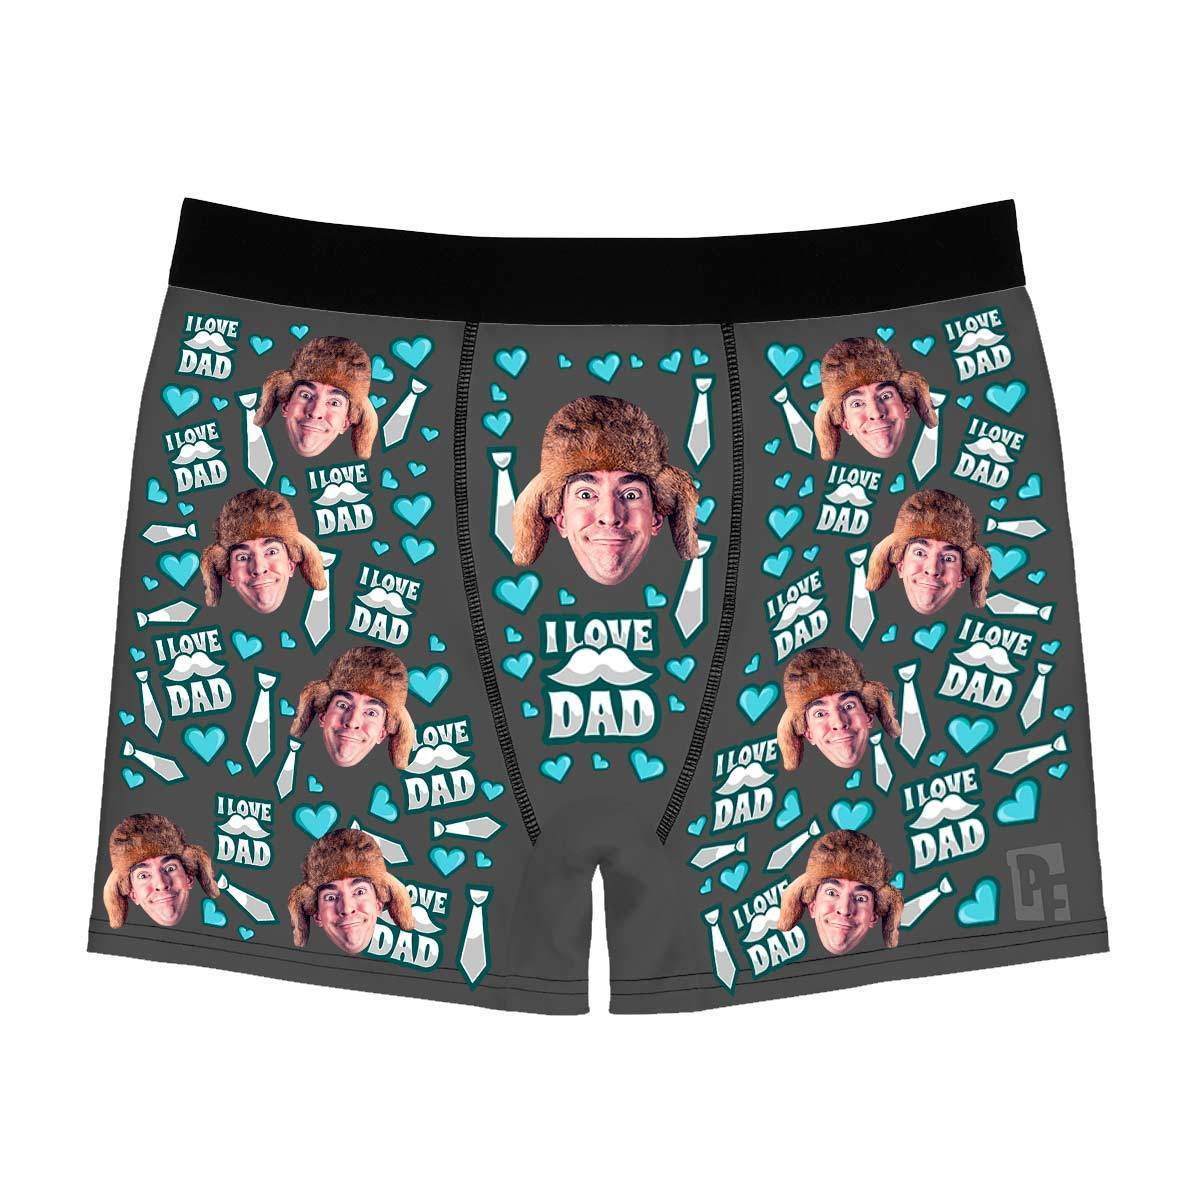 Dark Love dad men's boxer briefs personalized with photo printed on them